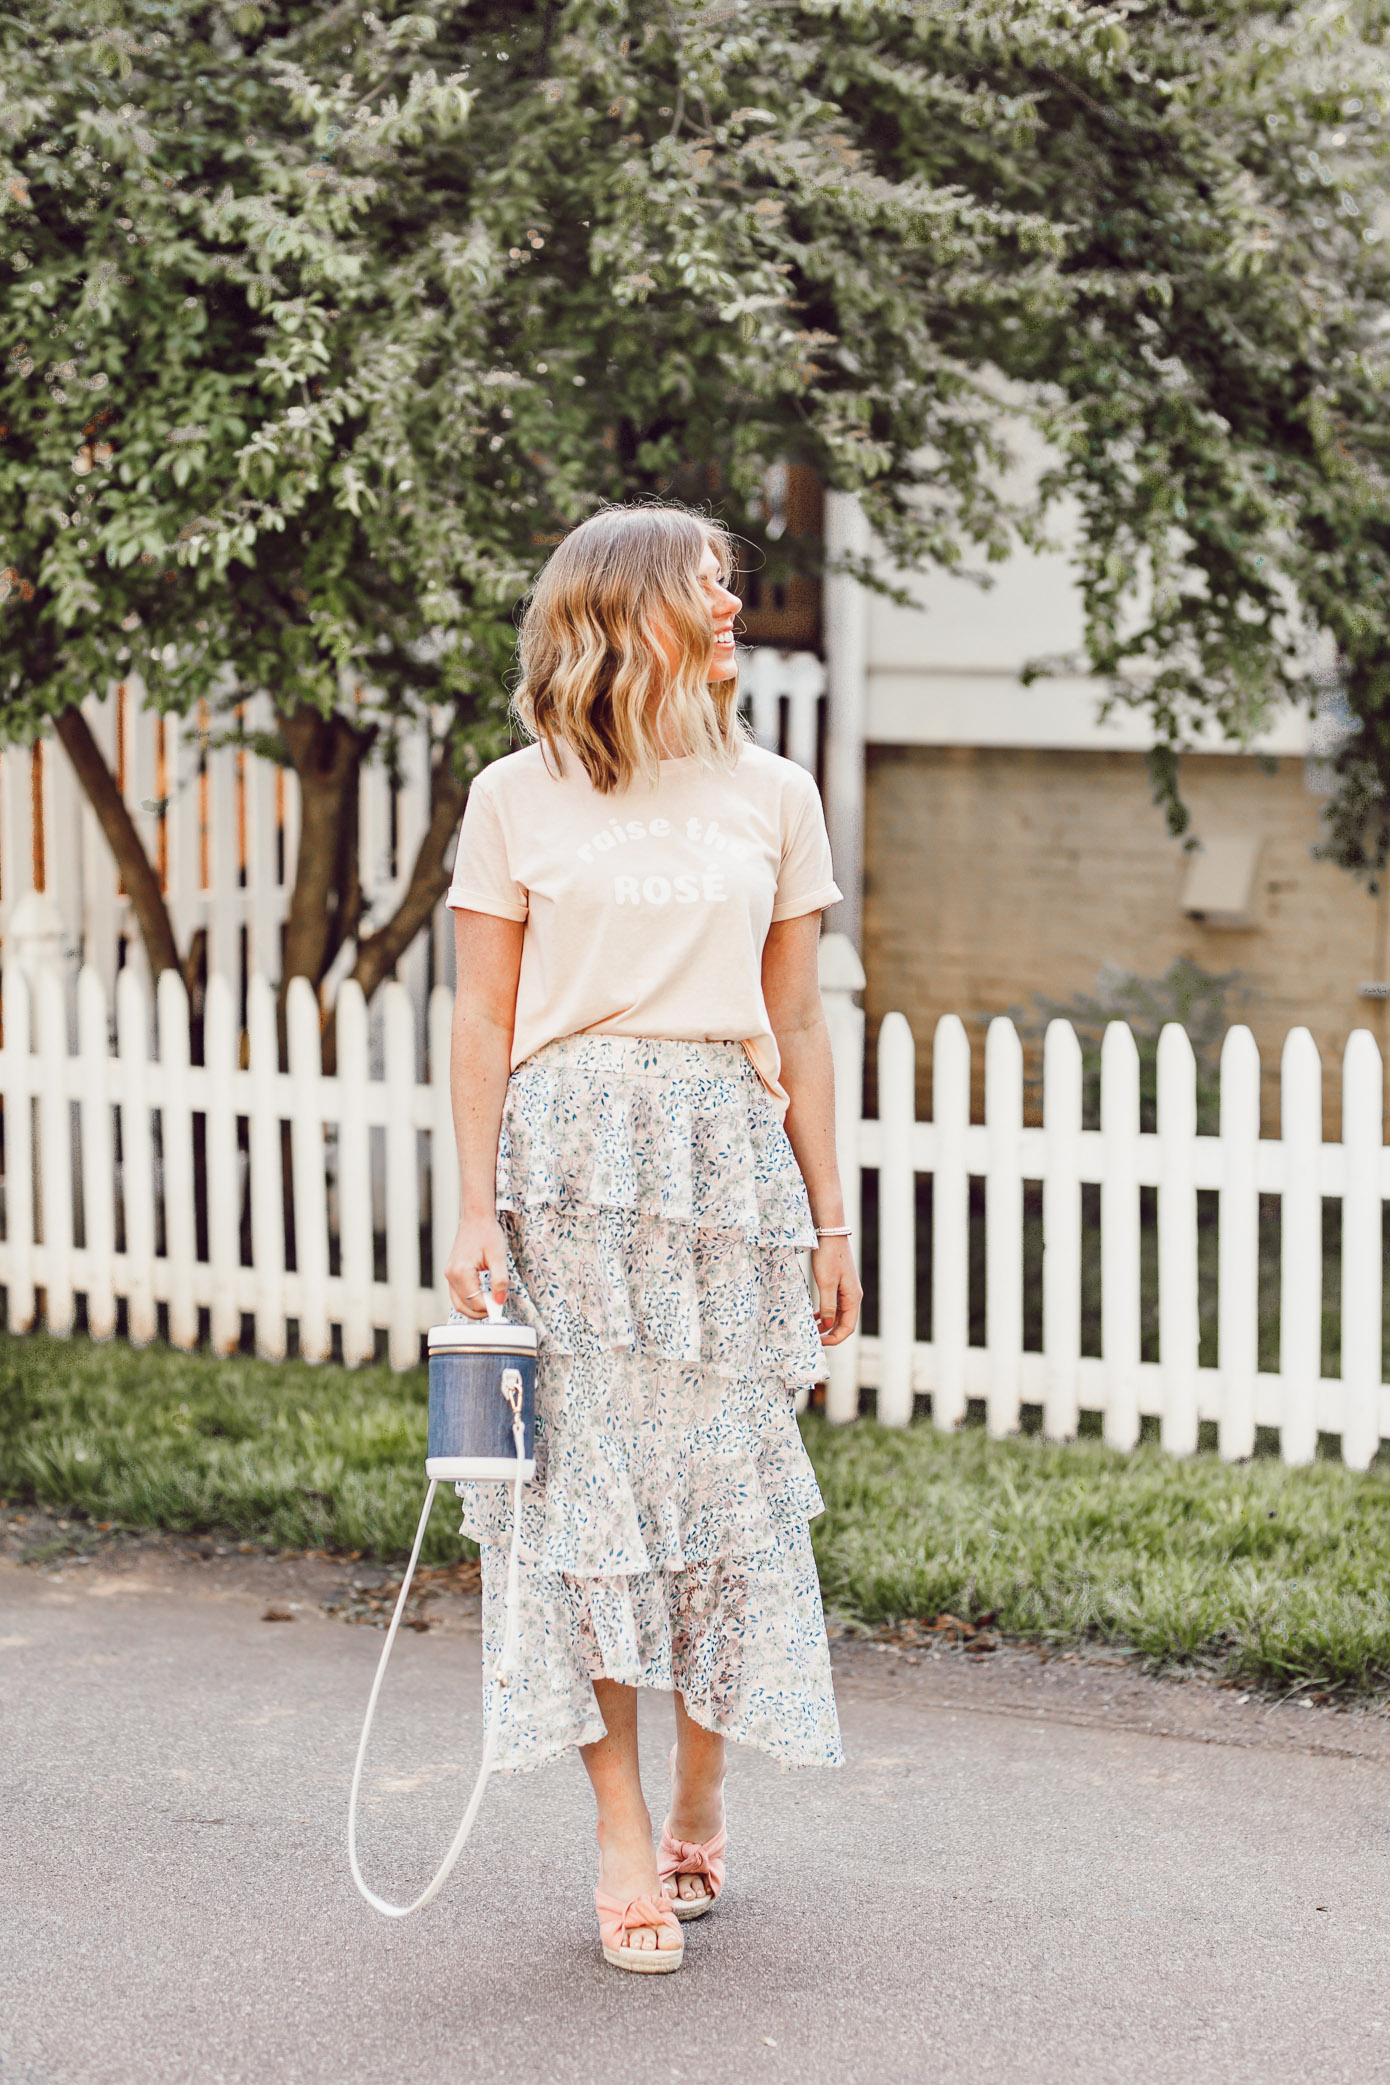 How to Dress Up a Crop Tee | Floral Midi Skirt, Rosé graphic tee | ft. Brunette the Label, Chicwish, Paravel | Louella Reese #summerstyle #midiskirt #femininestyle #chicwish #soludos